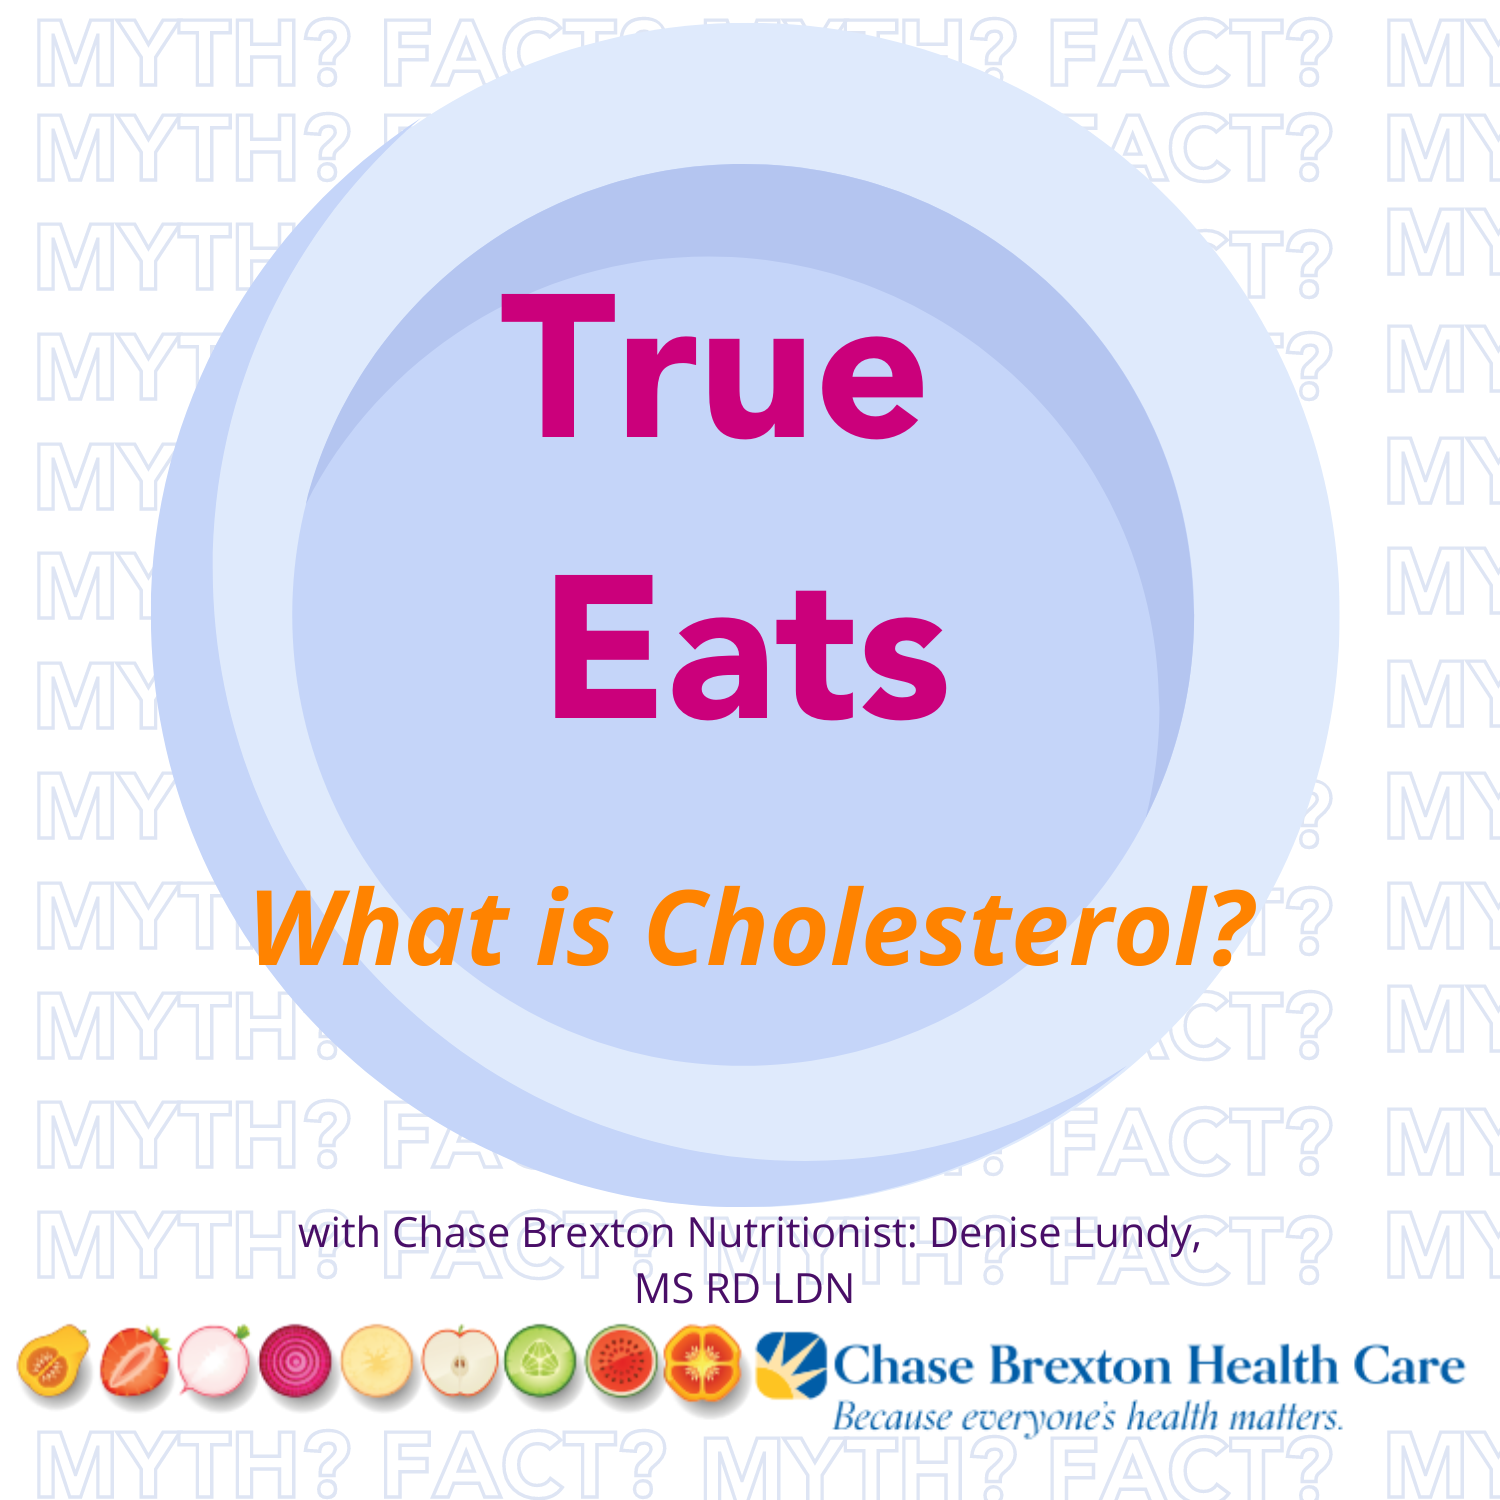 True Eats What is Cholesterol? Written over a blue plate graphic. with Chase Brexton Nutritionist Denise Lundy, MS RD LDN